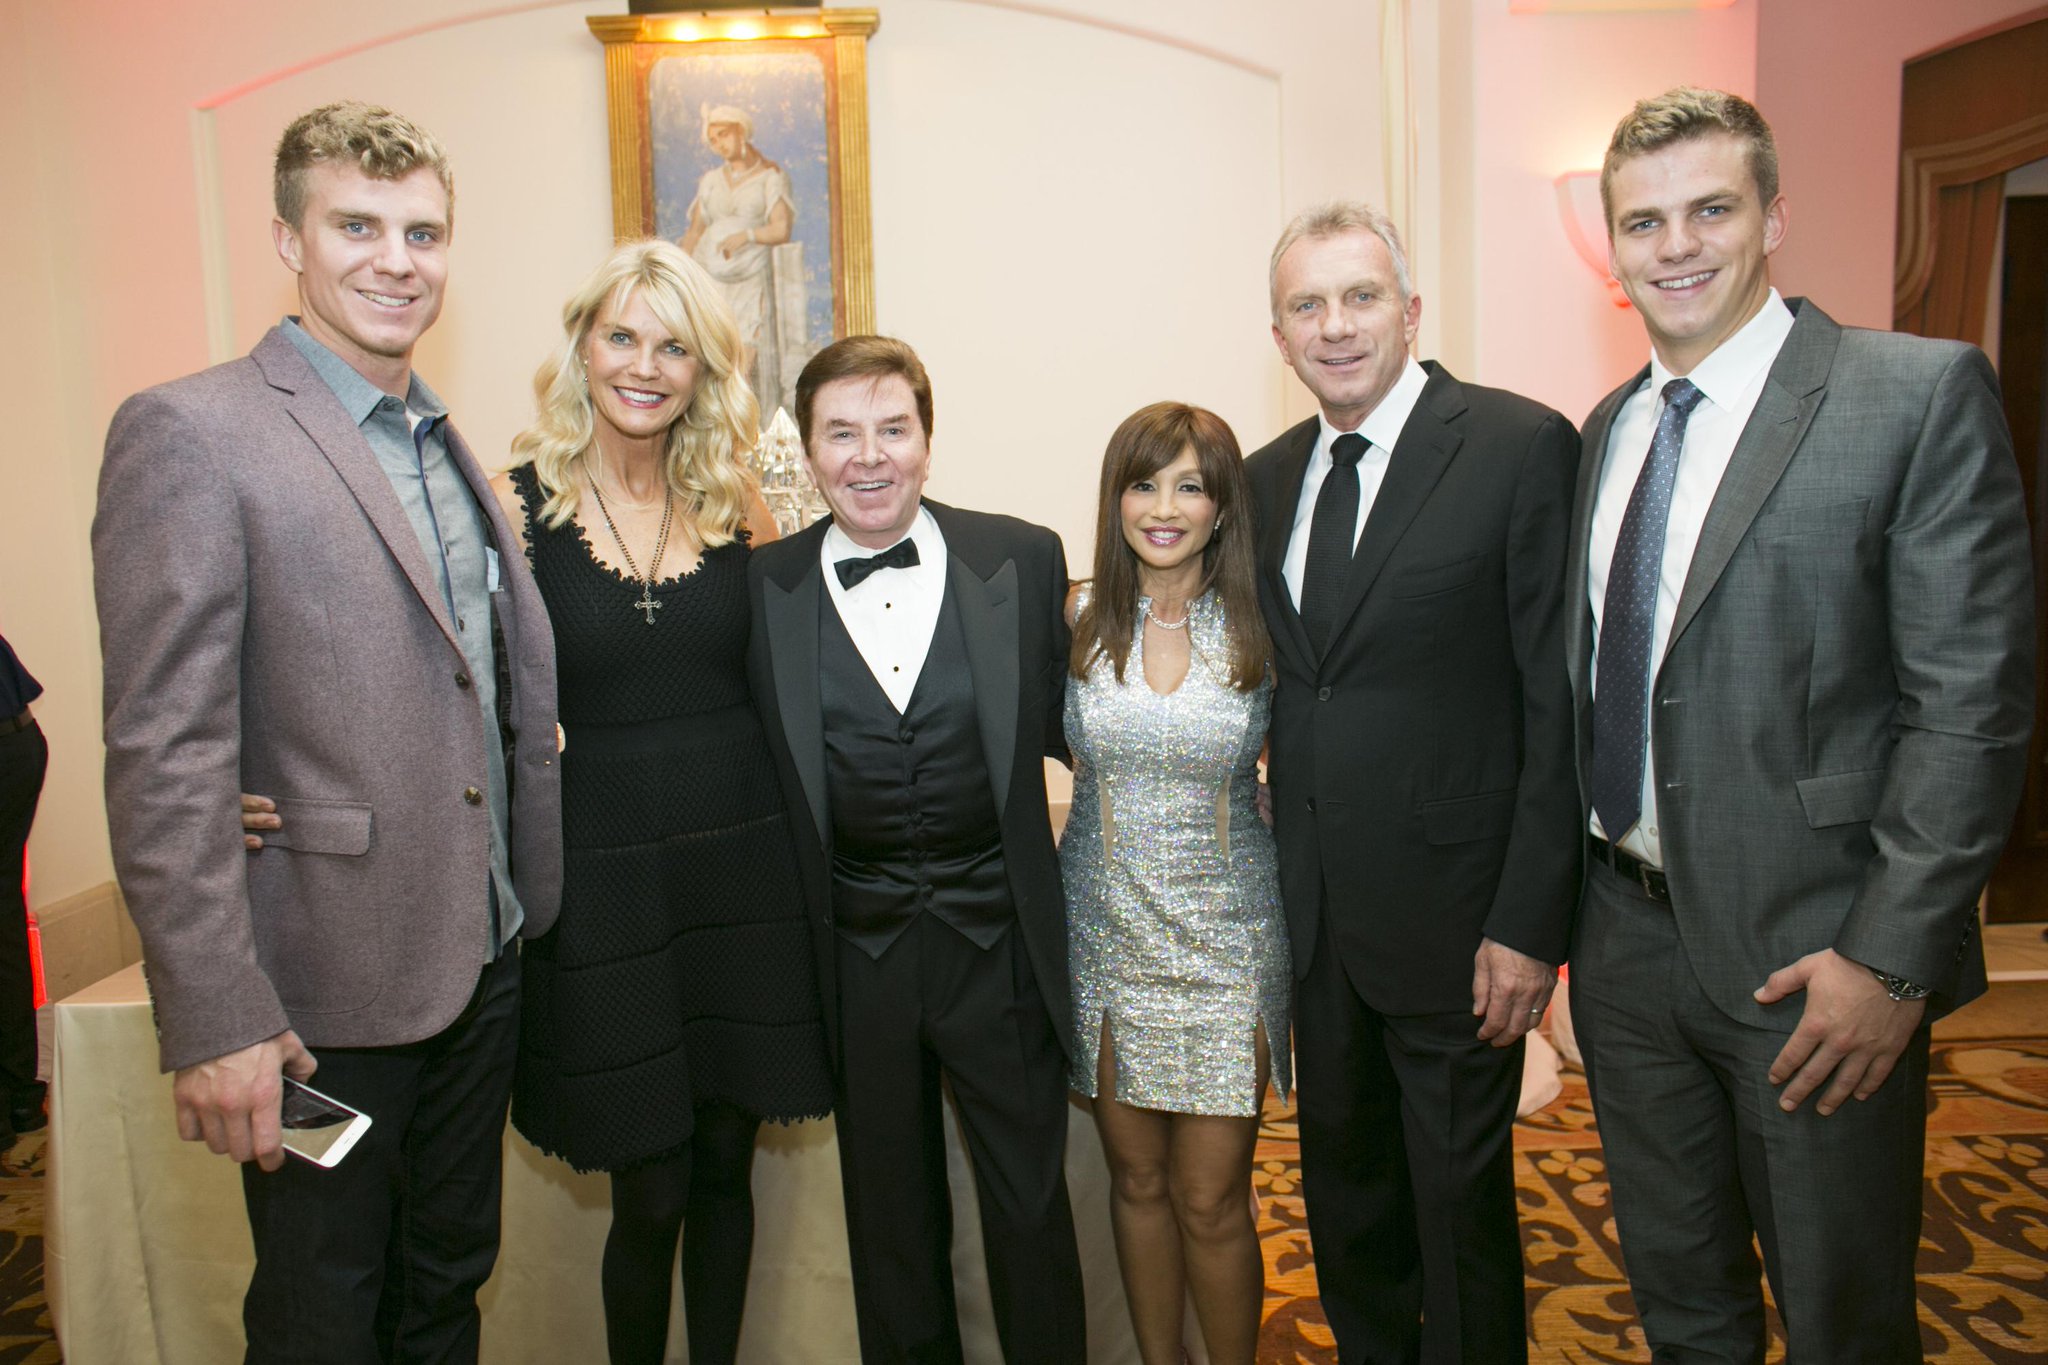 Happy birthday to a good friend and all-star athlete, Joe Montana! Here s a from the Holiday Party. 